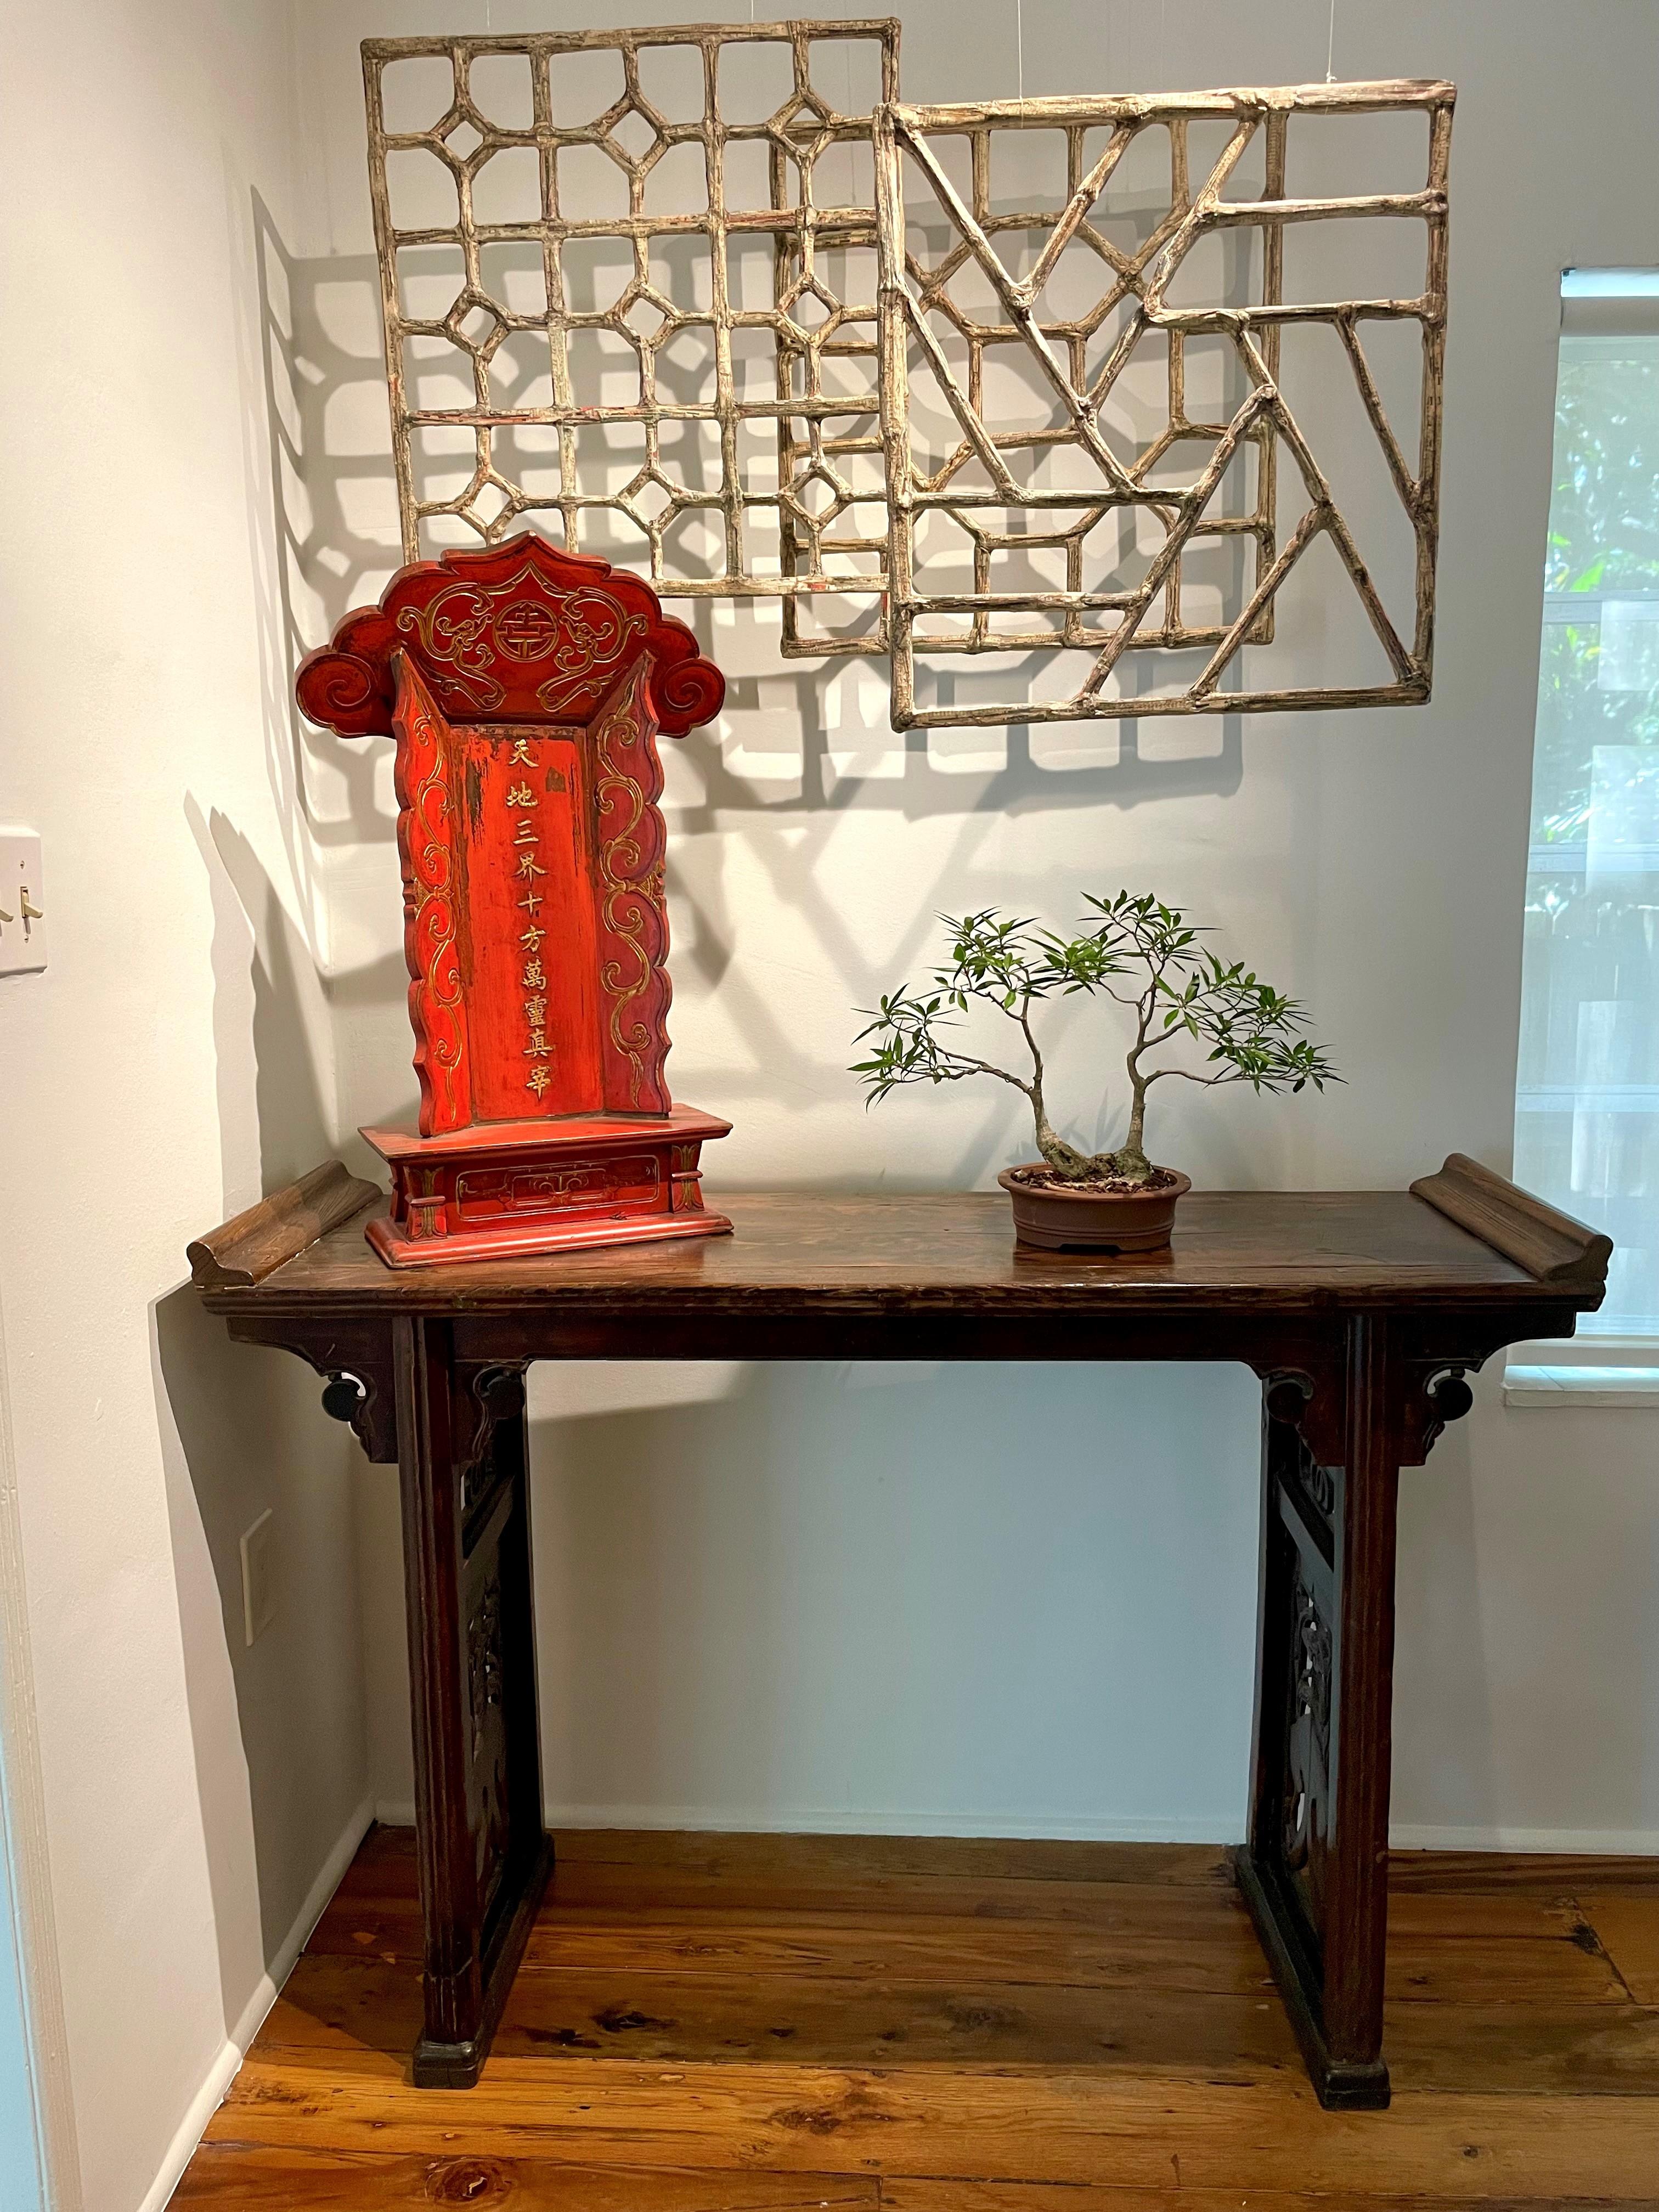 This beautifully carved 19th century altar table is traditionally constructed with mortise and tenon joinery from walnut wood (Hetao Mu). The aprons on the sides are carved with floral, lotus and ruyi symbols. Ruyi is an ancient symbol of good